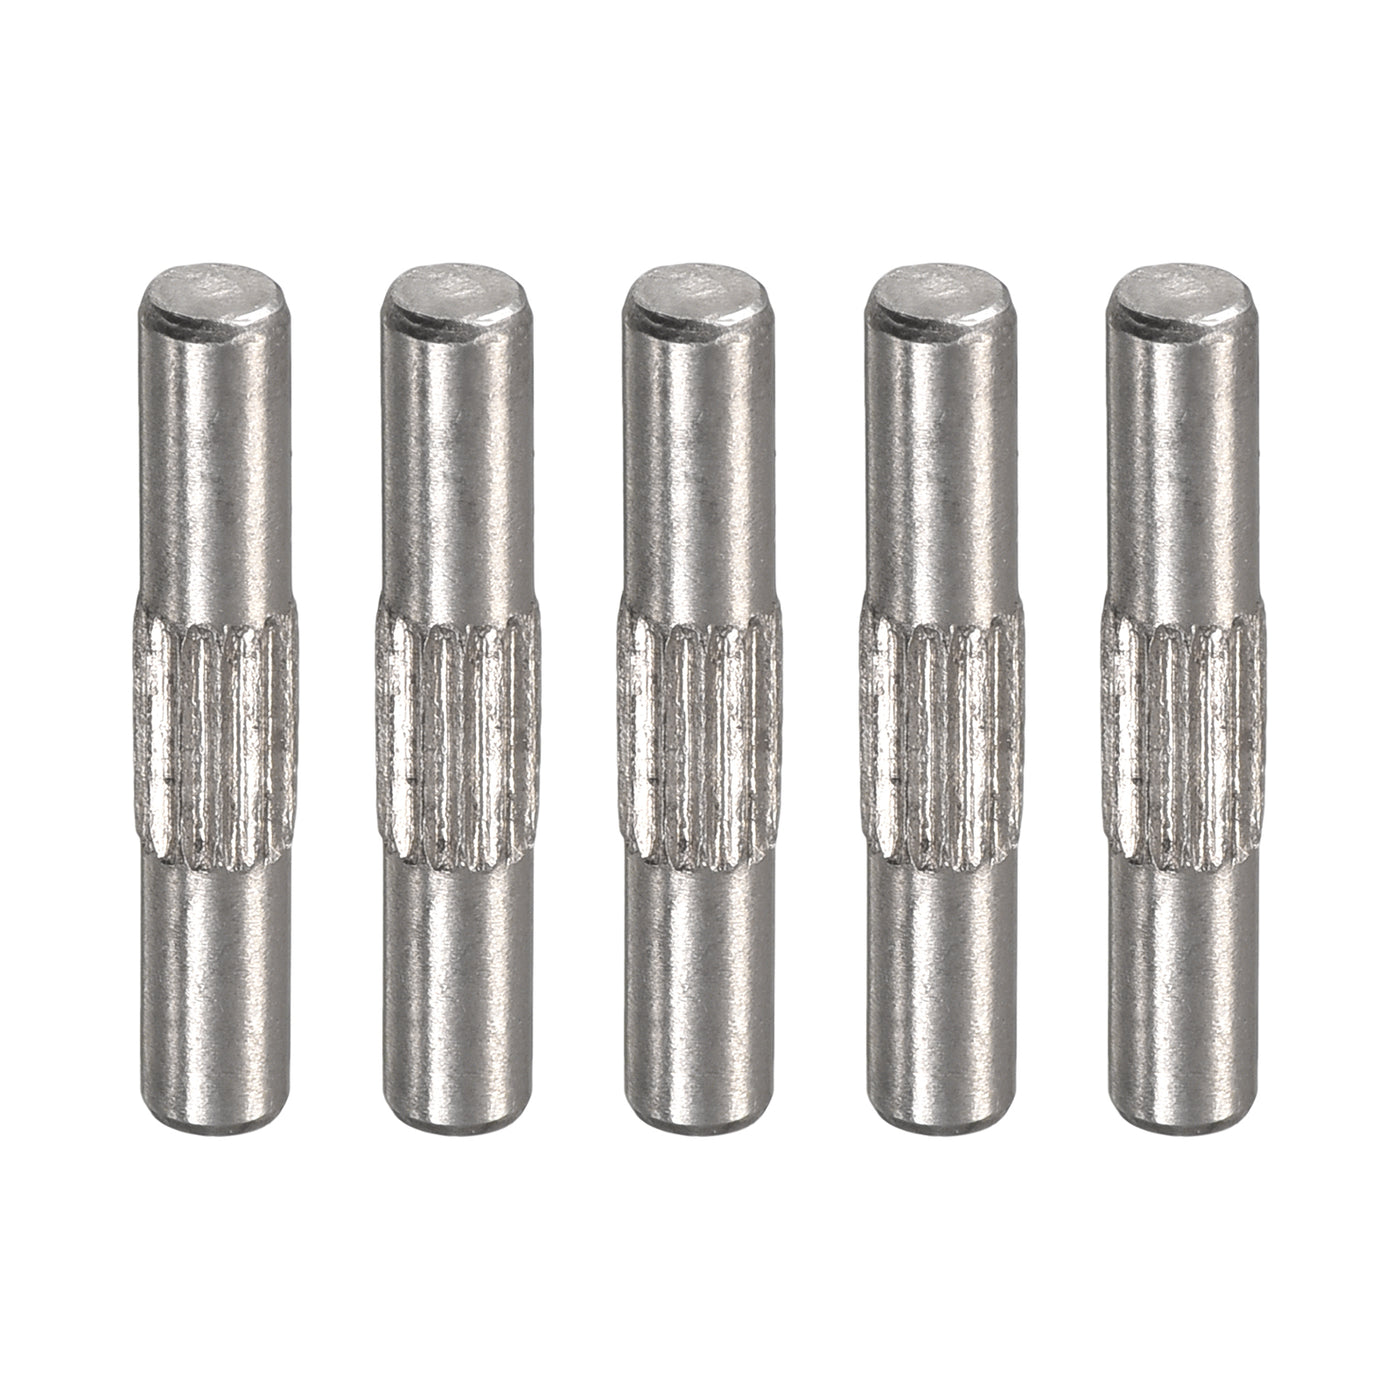 uxcell Uxcell 3x18mm 304 Stainless Steel Dowel Pins, 5Pcs Center Knurled Chamfered End Pin